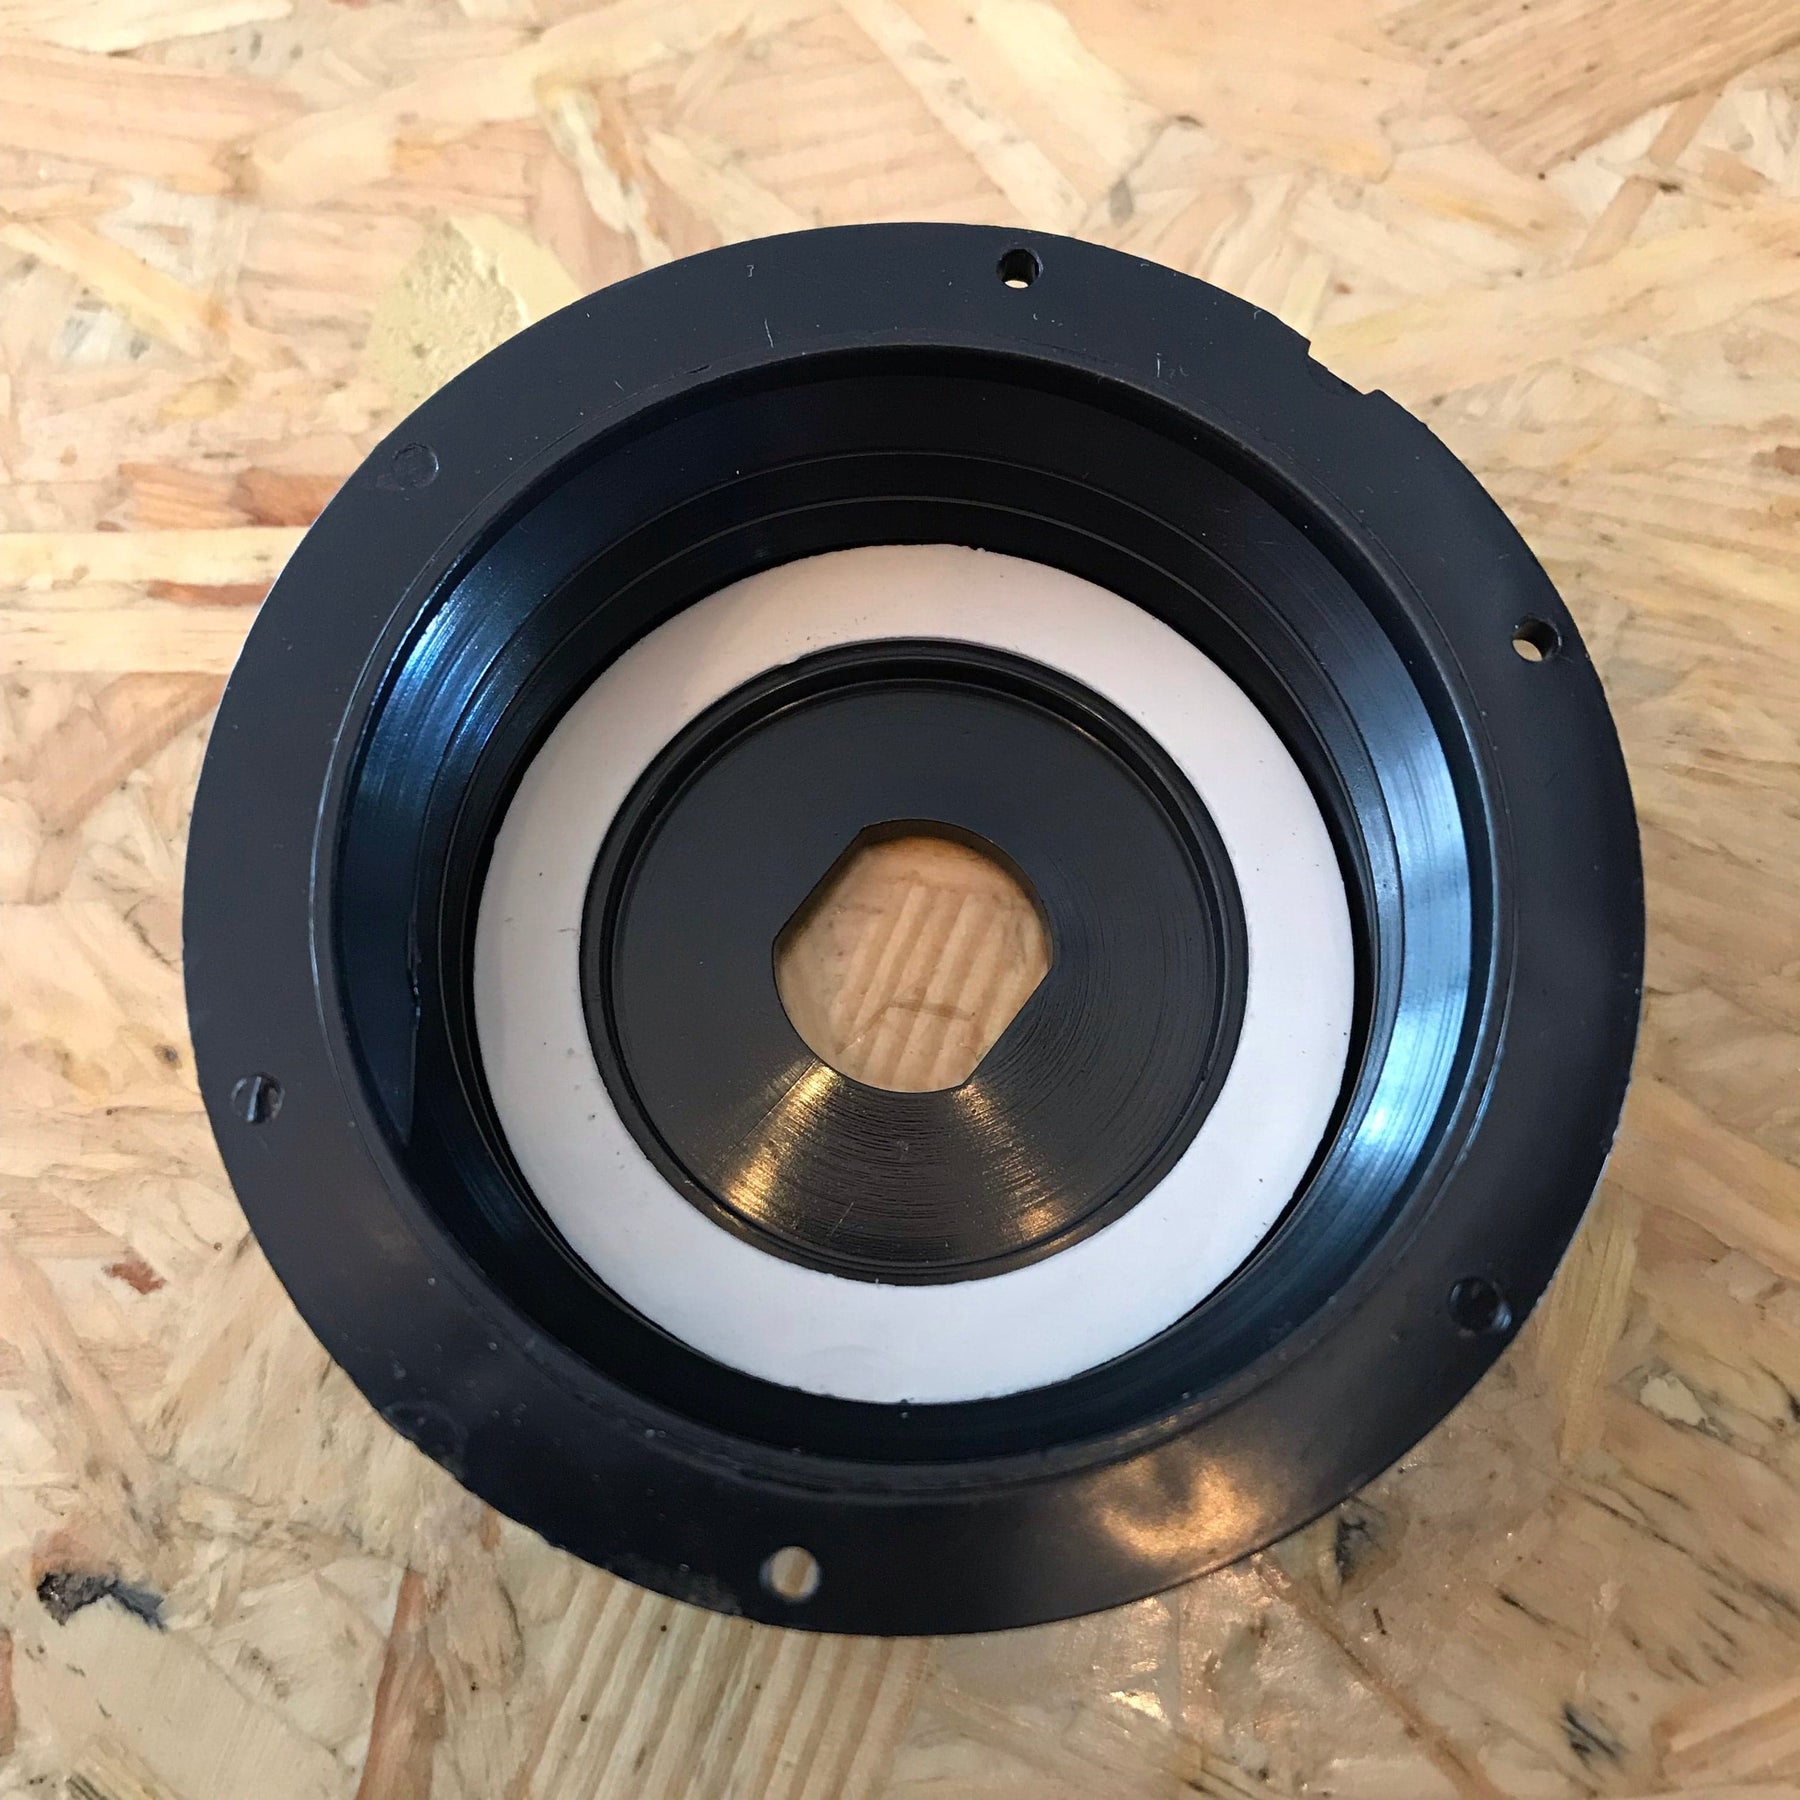 2" Barrel Cap with hole drilled for valve